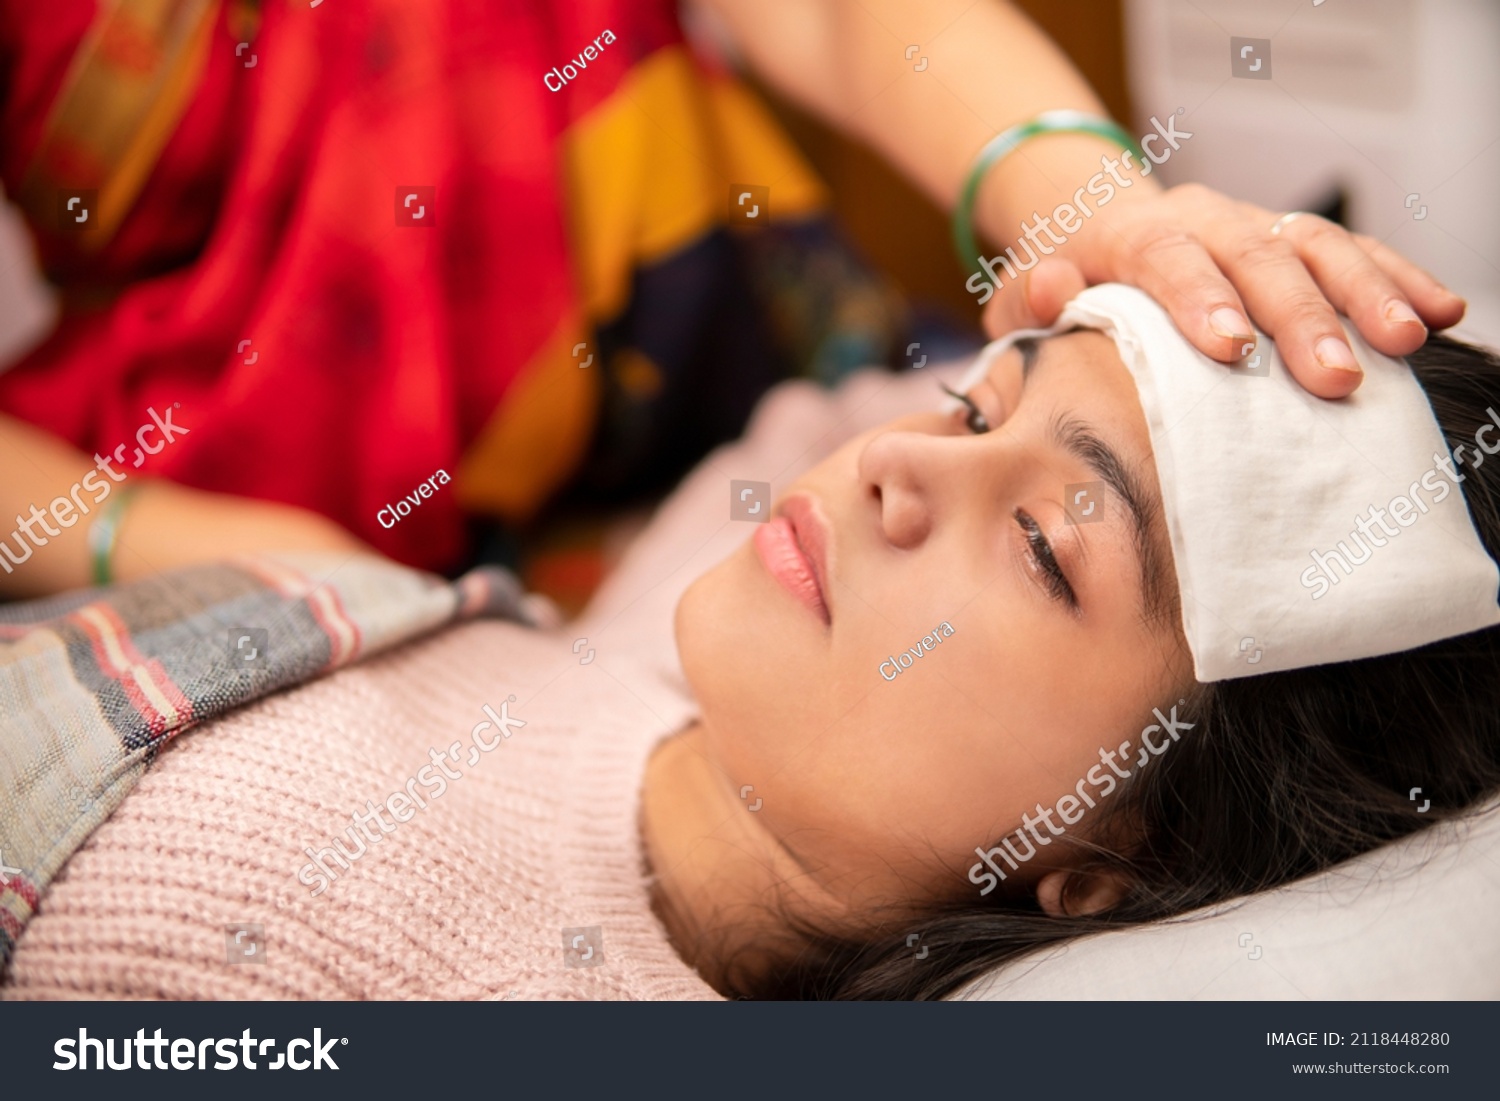 Indoor image of Indian matures mother sponging her ill daughter’s forehead to reduce the temperature down. She is having a high fever and lying in bed at home. She is wearing warm clothes. #2118448280